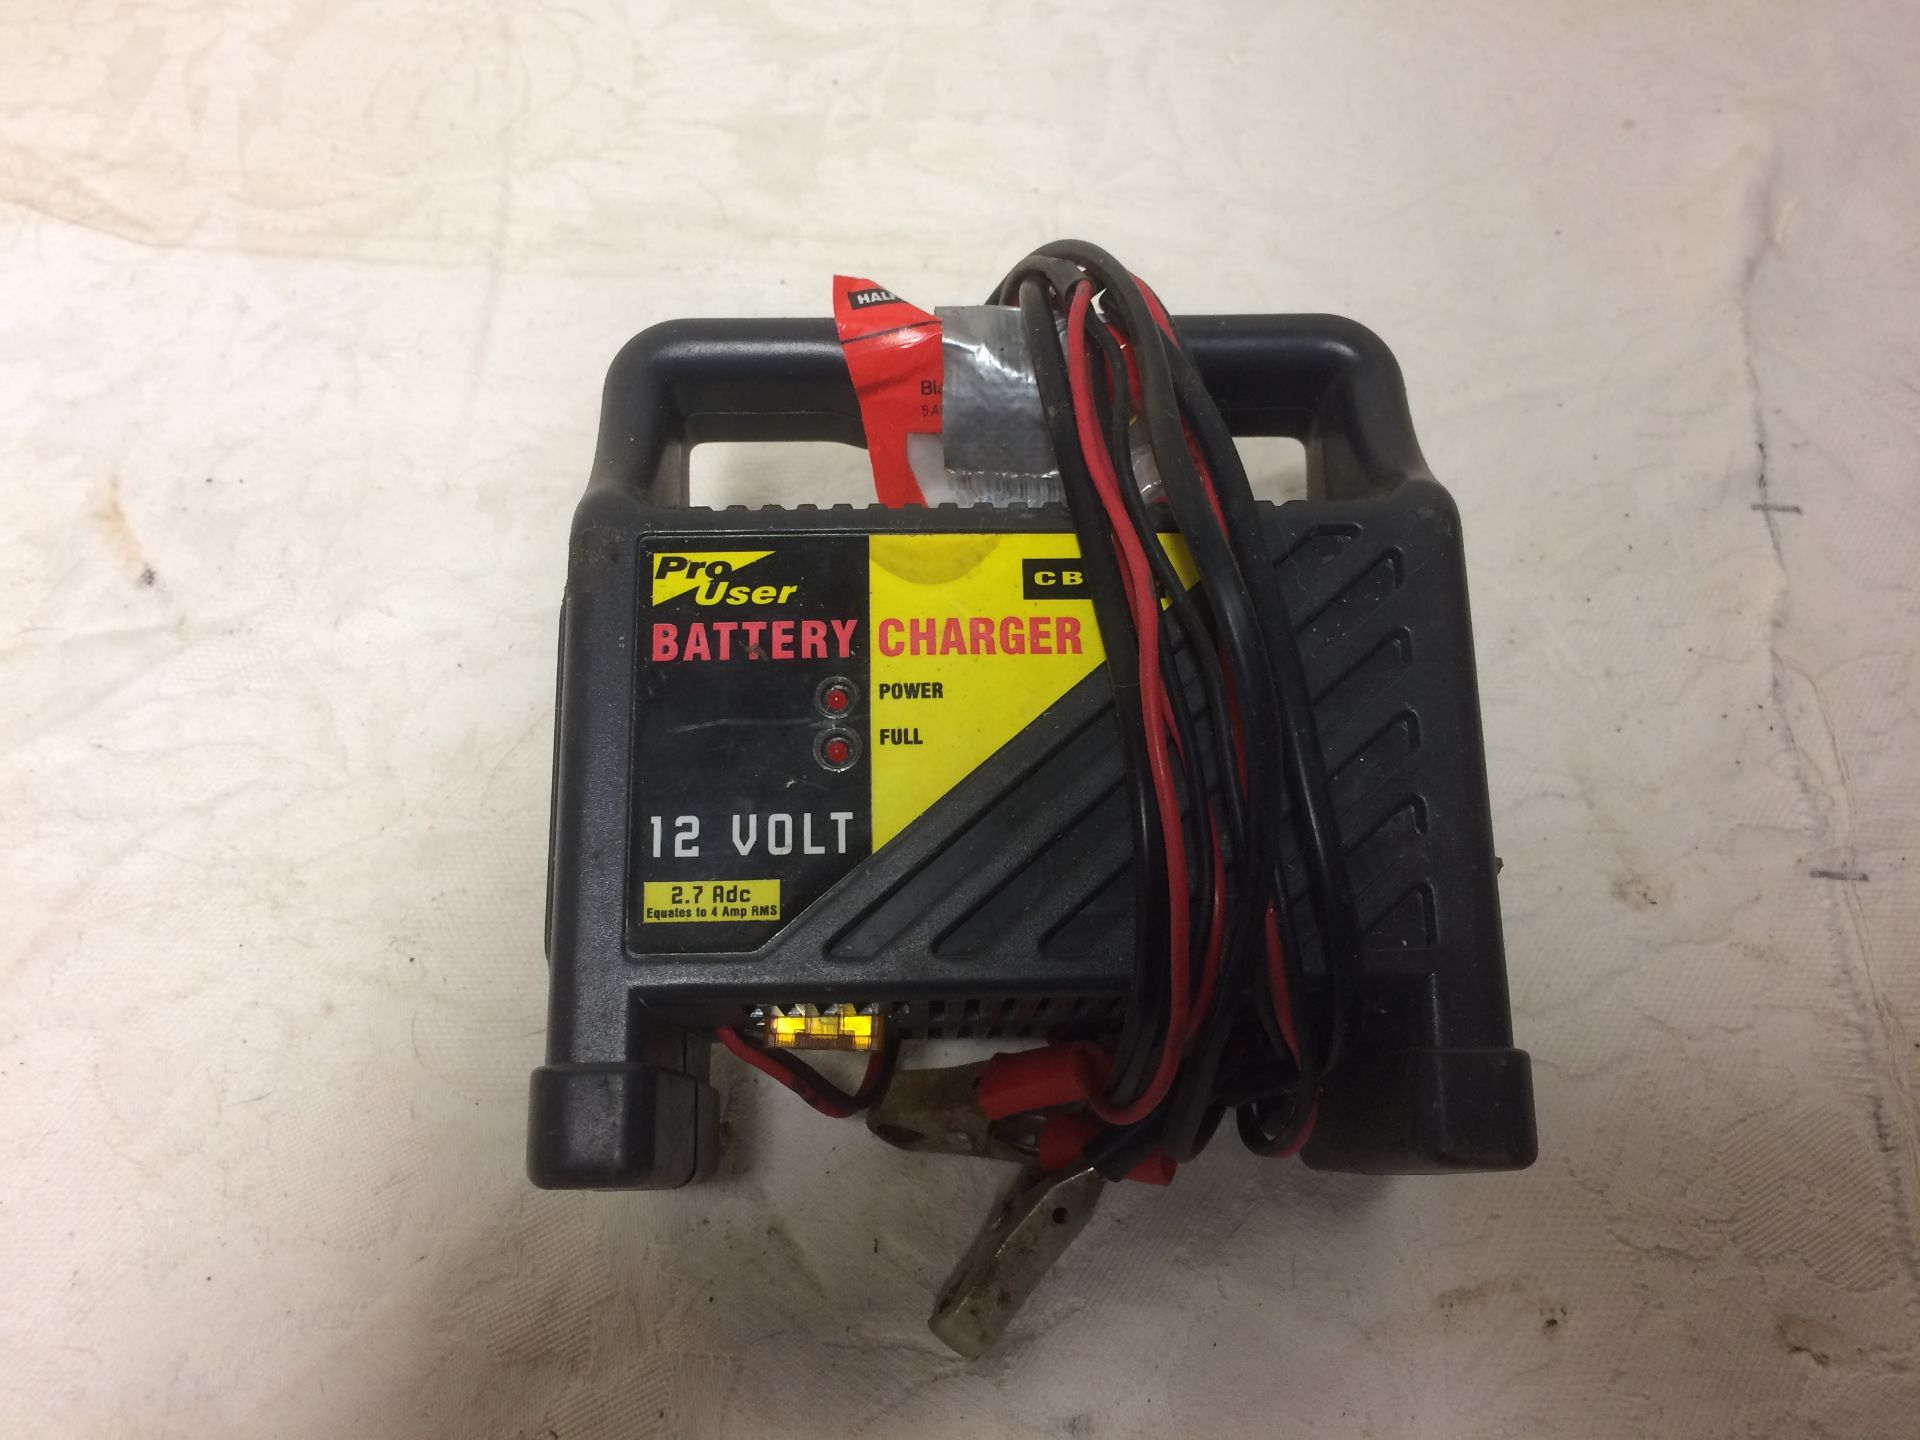 Pro User CBC4 12v Battery Charger